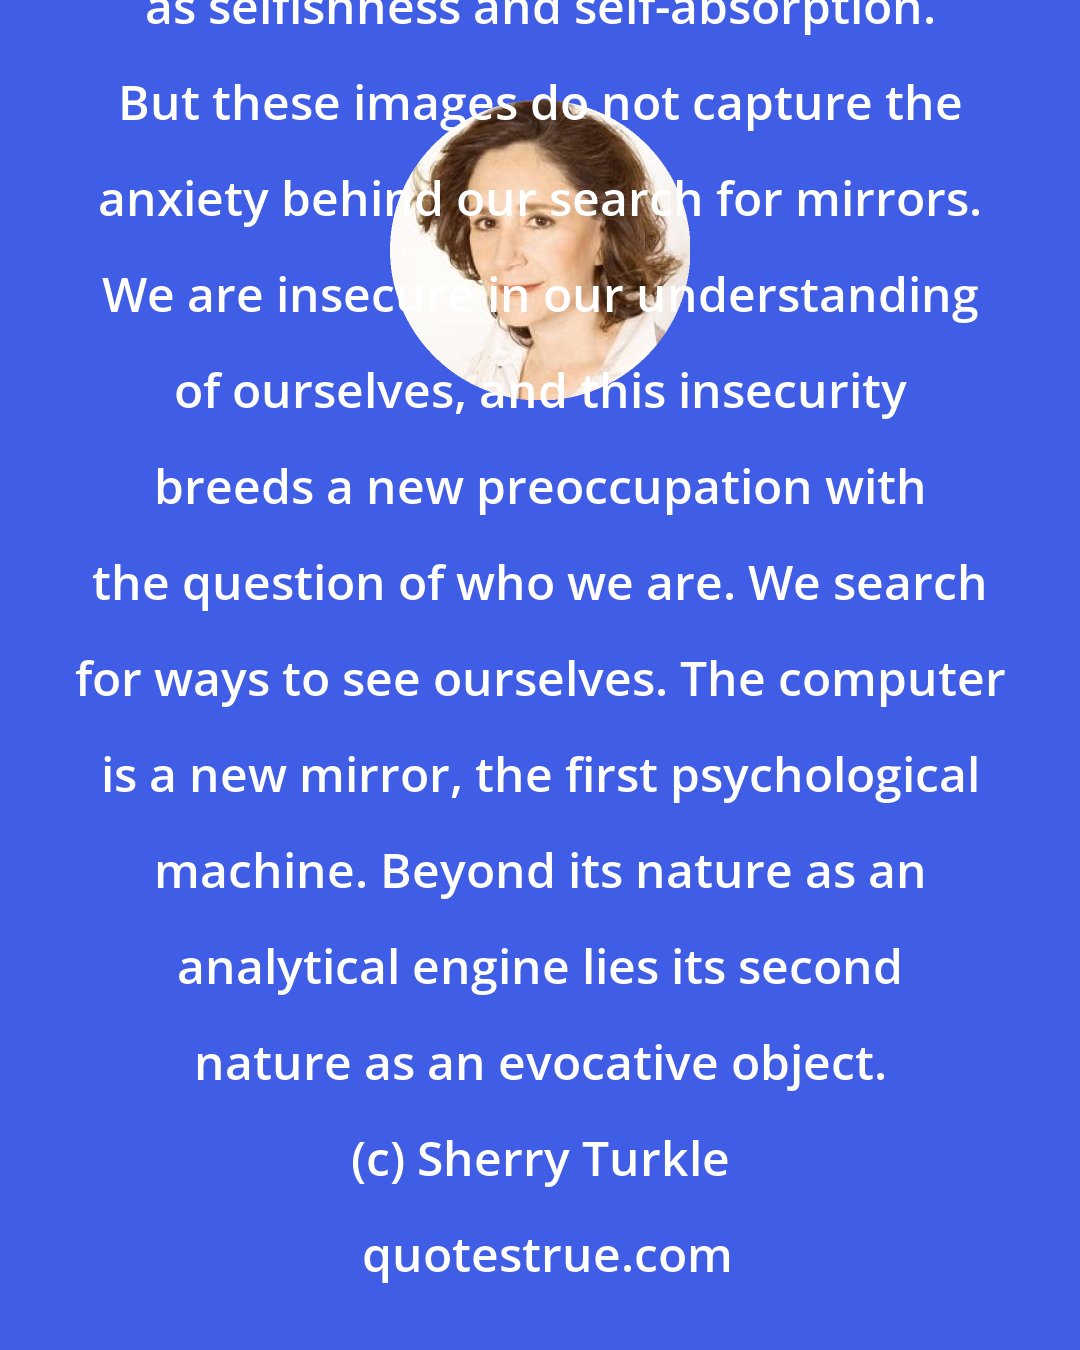 Sherry Turkle: Ours has been called a culture of narcissism. The label is apt but can be misleading. It reads colloquially as selfishness and self-absorption. But these images do not capture the anxiety behind our search for mirrors. We are insecure in our understanding of ourselves, and this insecurity breeds a new preoccupation with the question of who we are. We search for ways to see ourselves. The computer is a new mirror, the first psychological machine. Beyond its nature as an analytical engine lies its second nature as an evocative object.